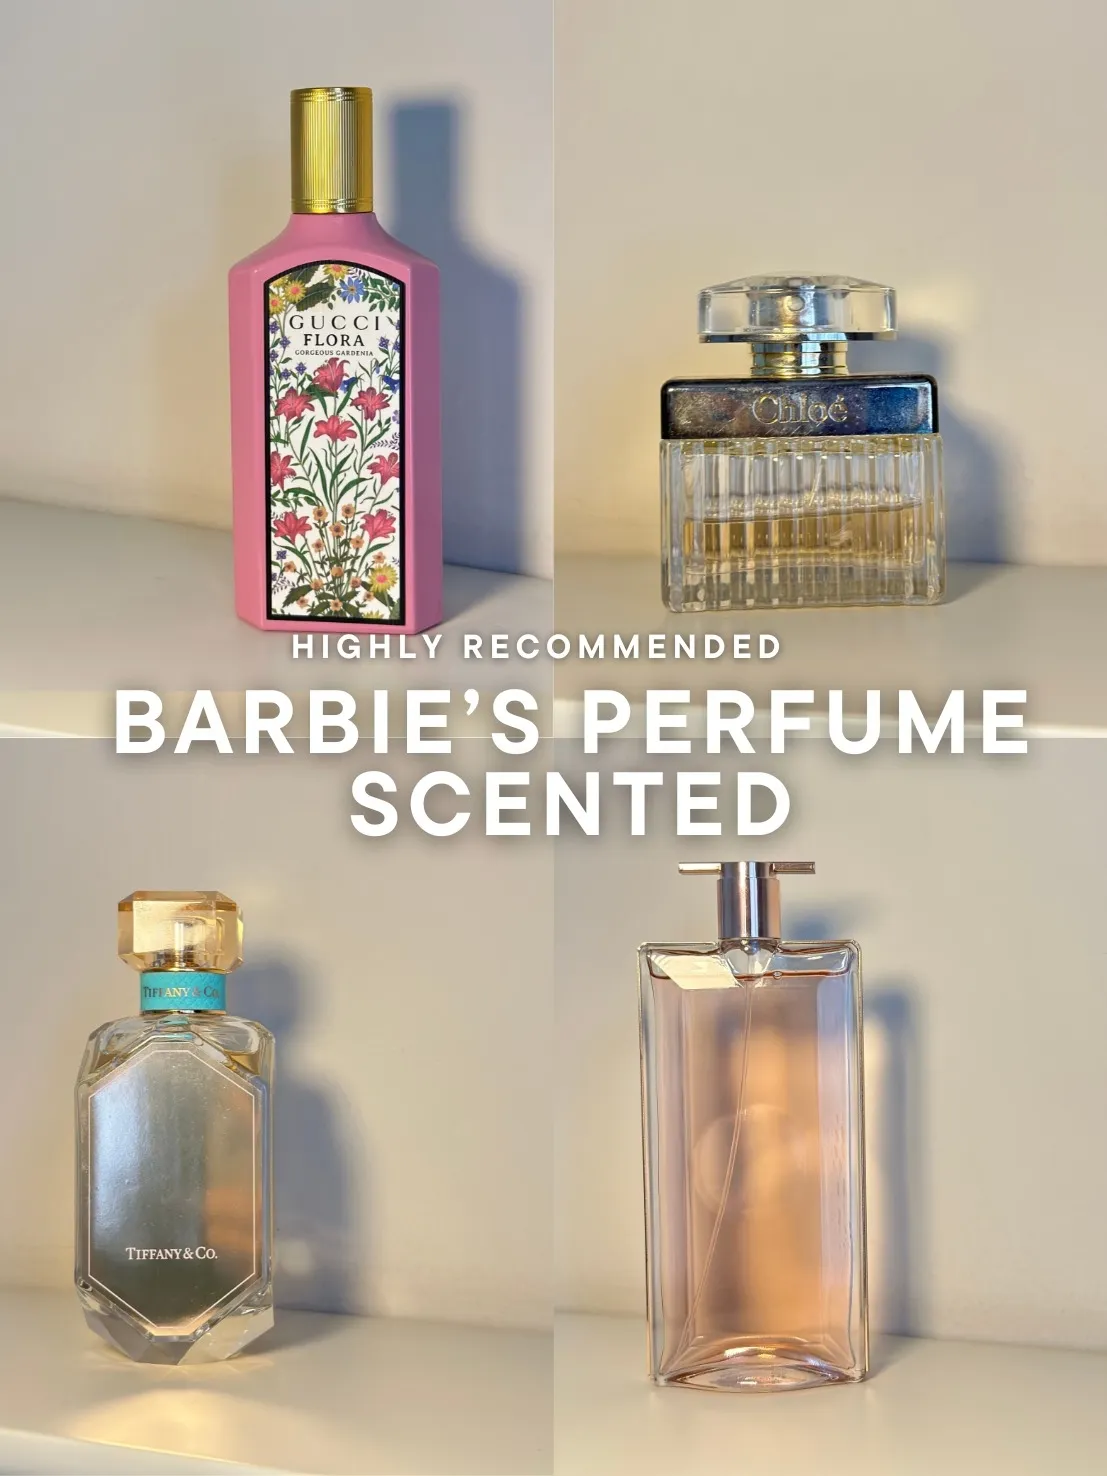 Barbie's Perfume Scented 💐✨, Gallery posted by Nadine Busthomy